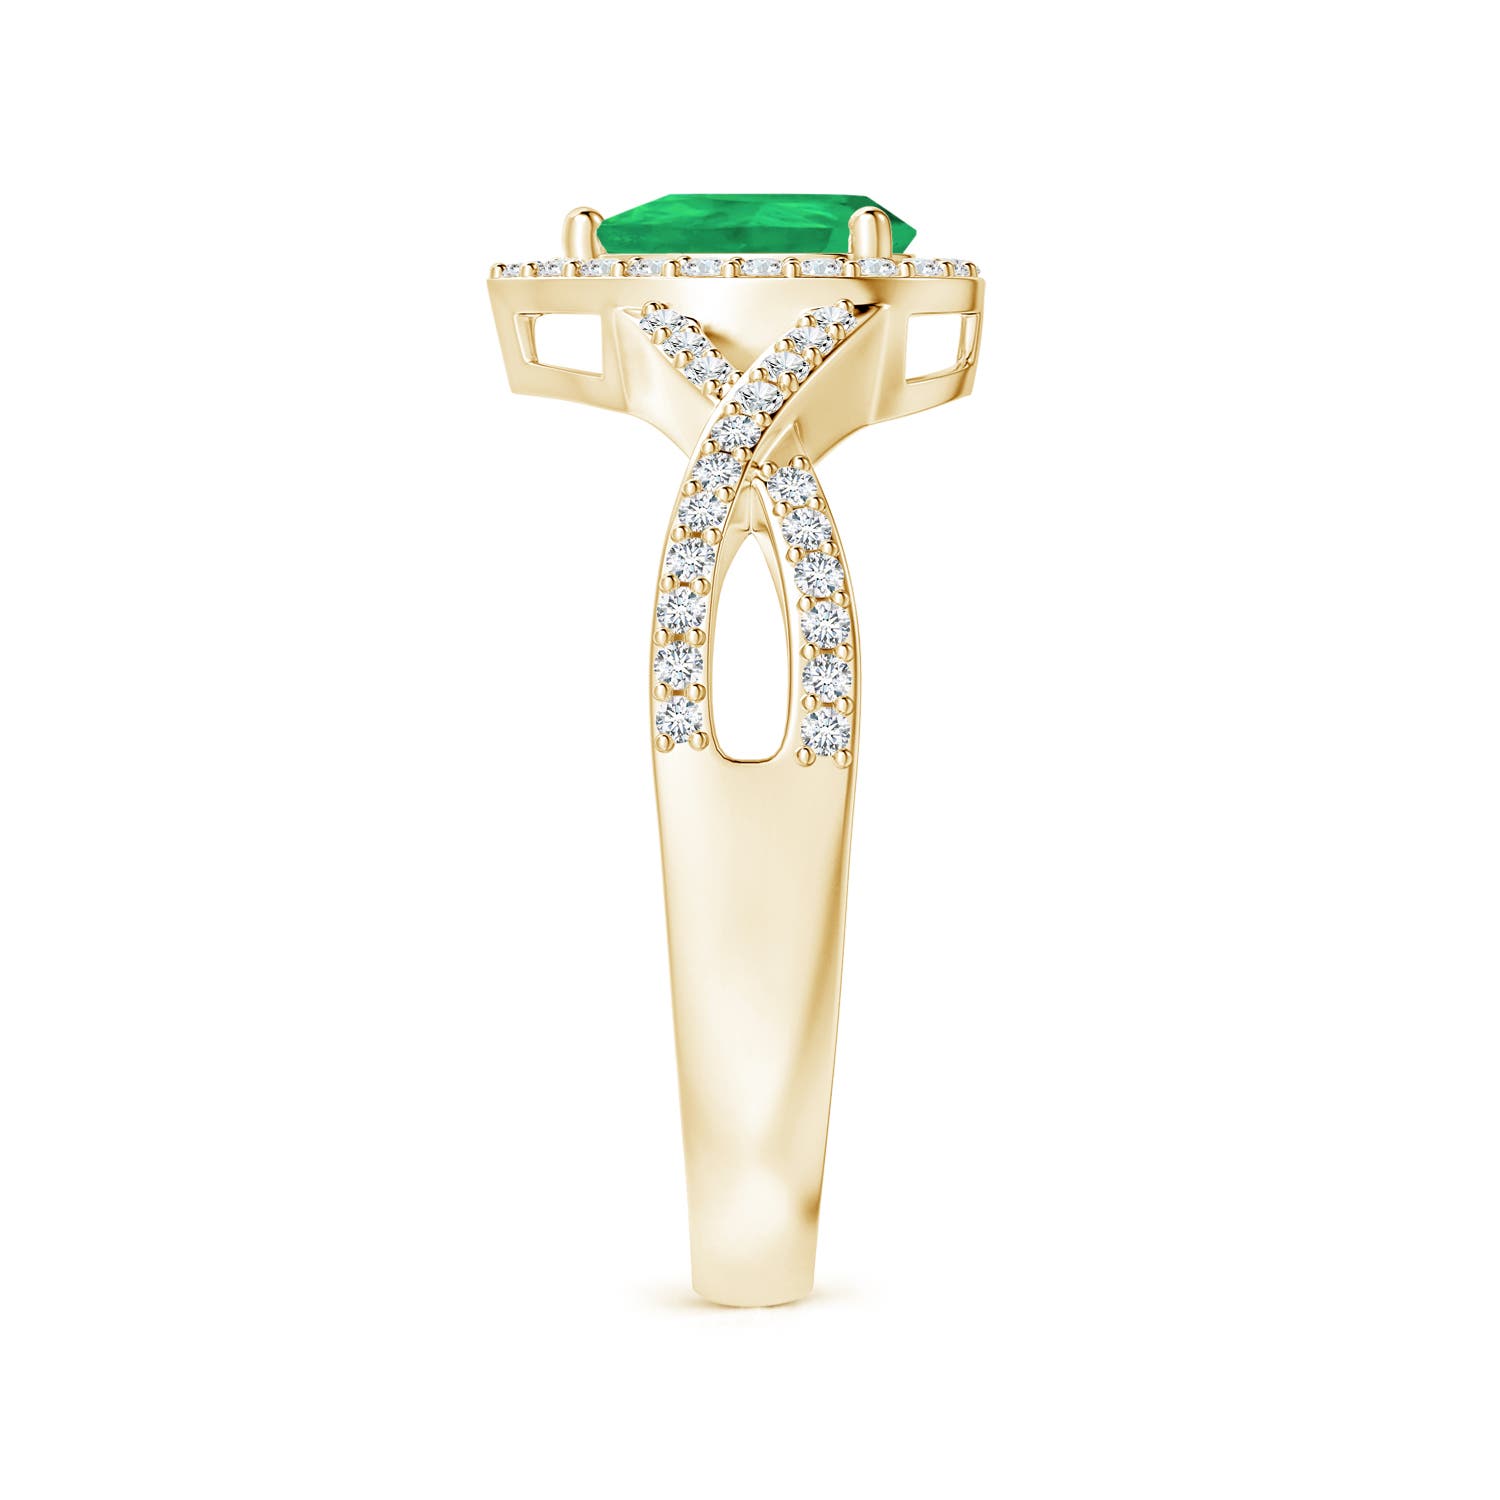 A - Emerald / 0.65 CT / 14 KT Yellow Gold